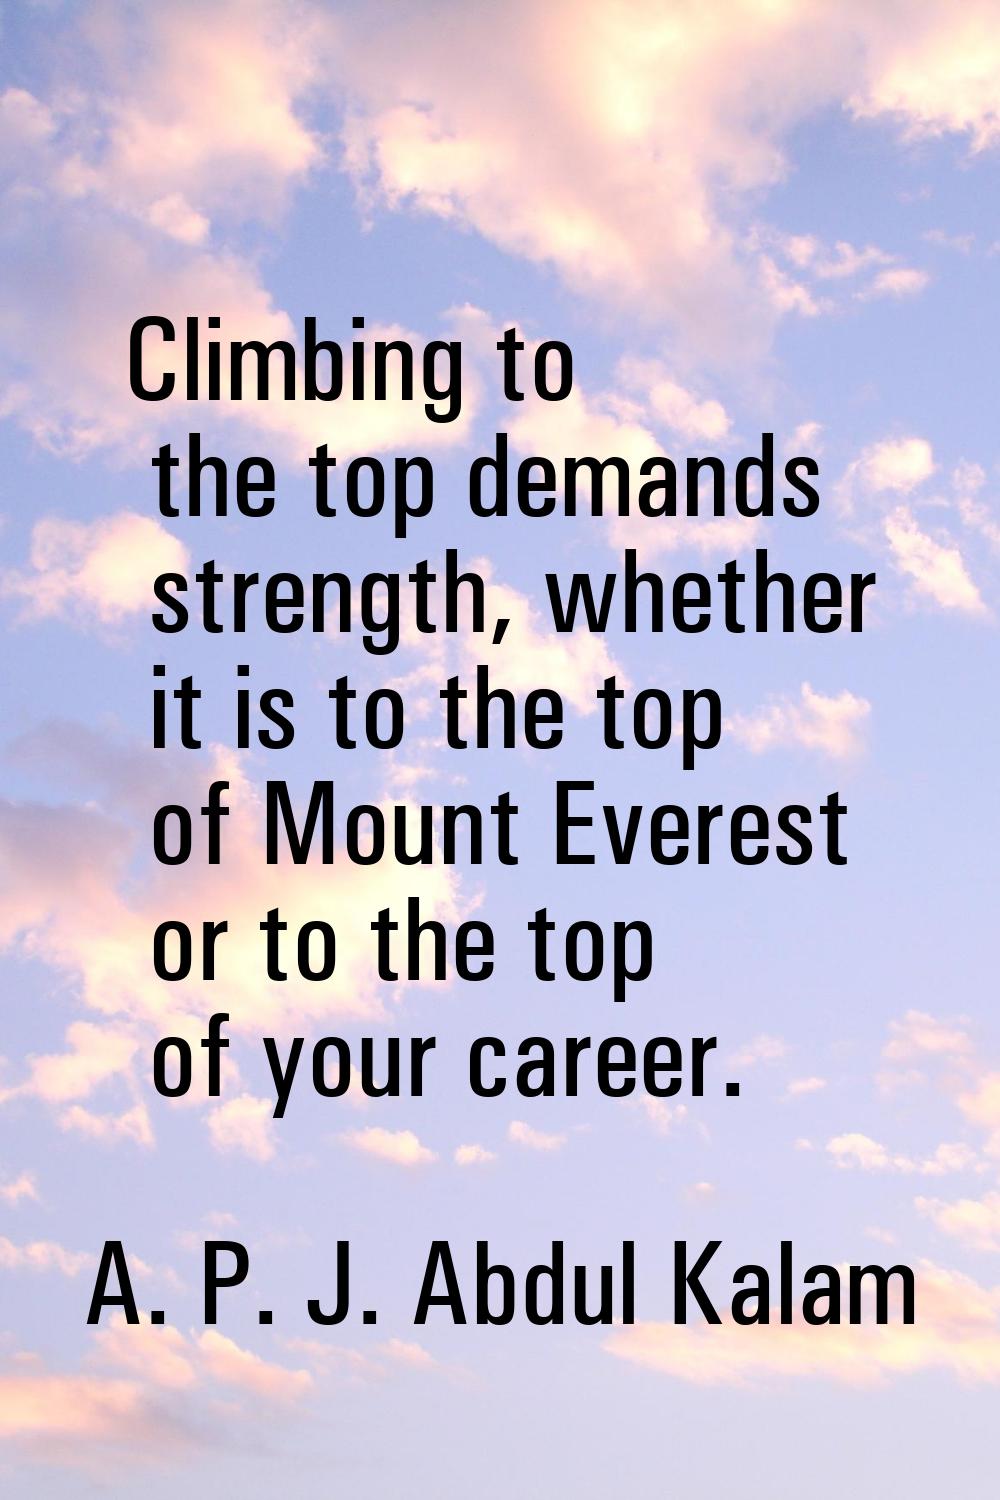 Climbing to the top demands strength, whether it is to the top of Mount Everest or to the top of yo